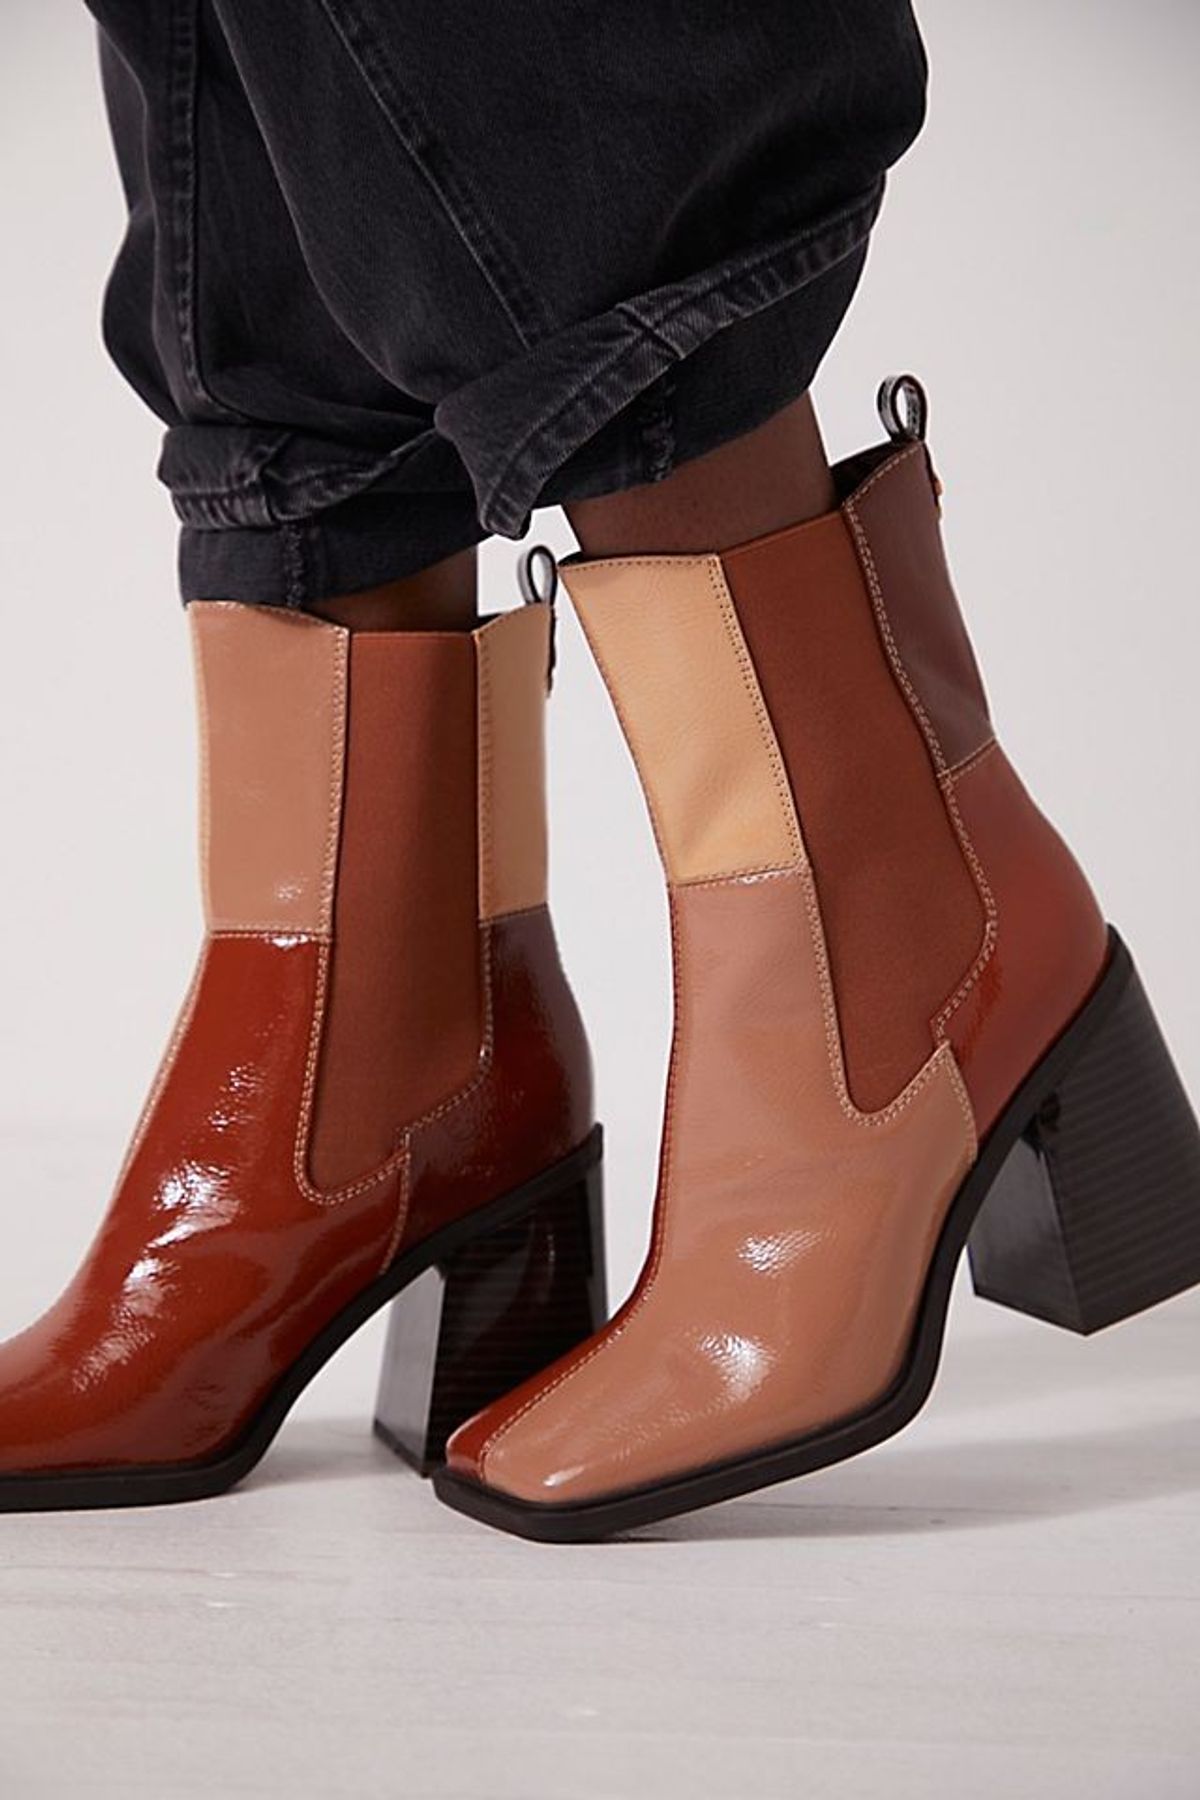 Which New Fall Boot Trend Are You?